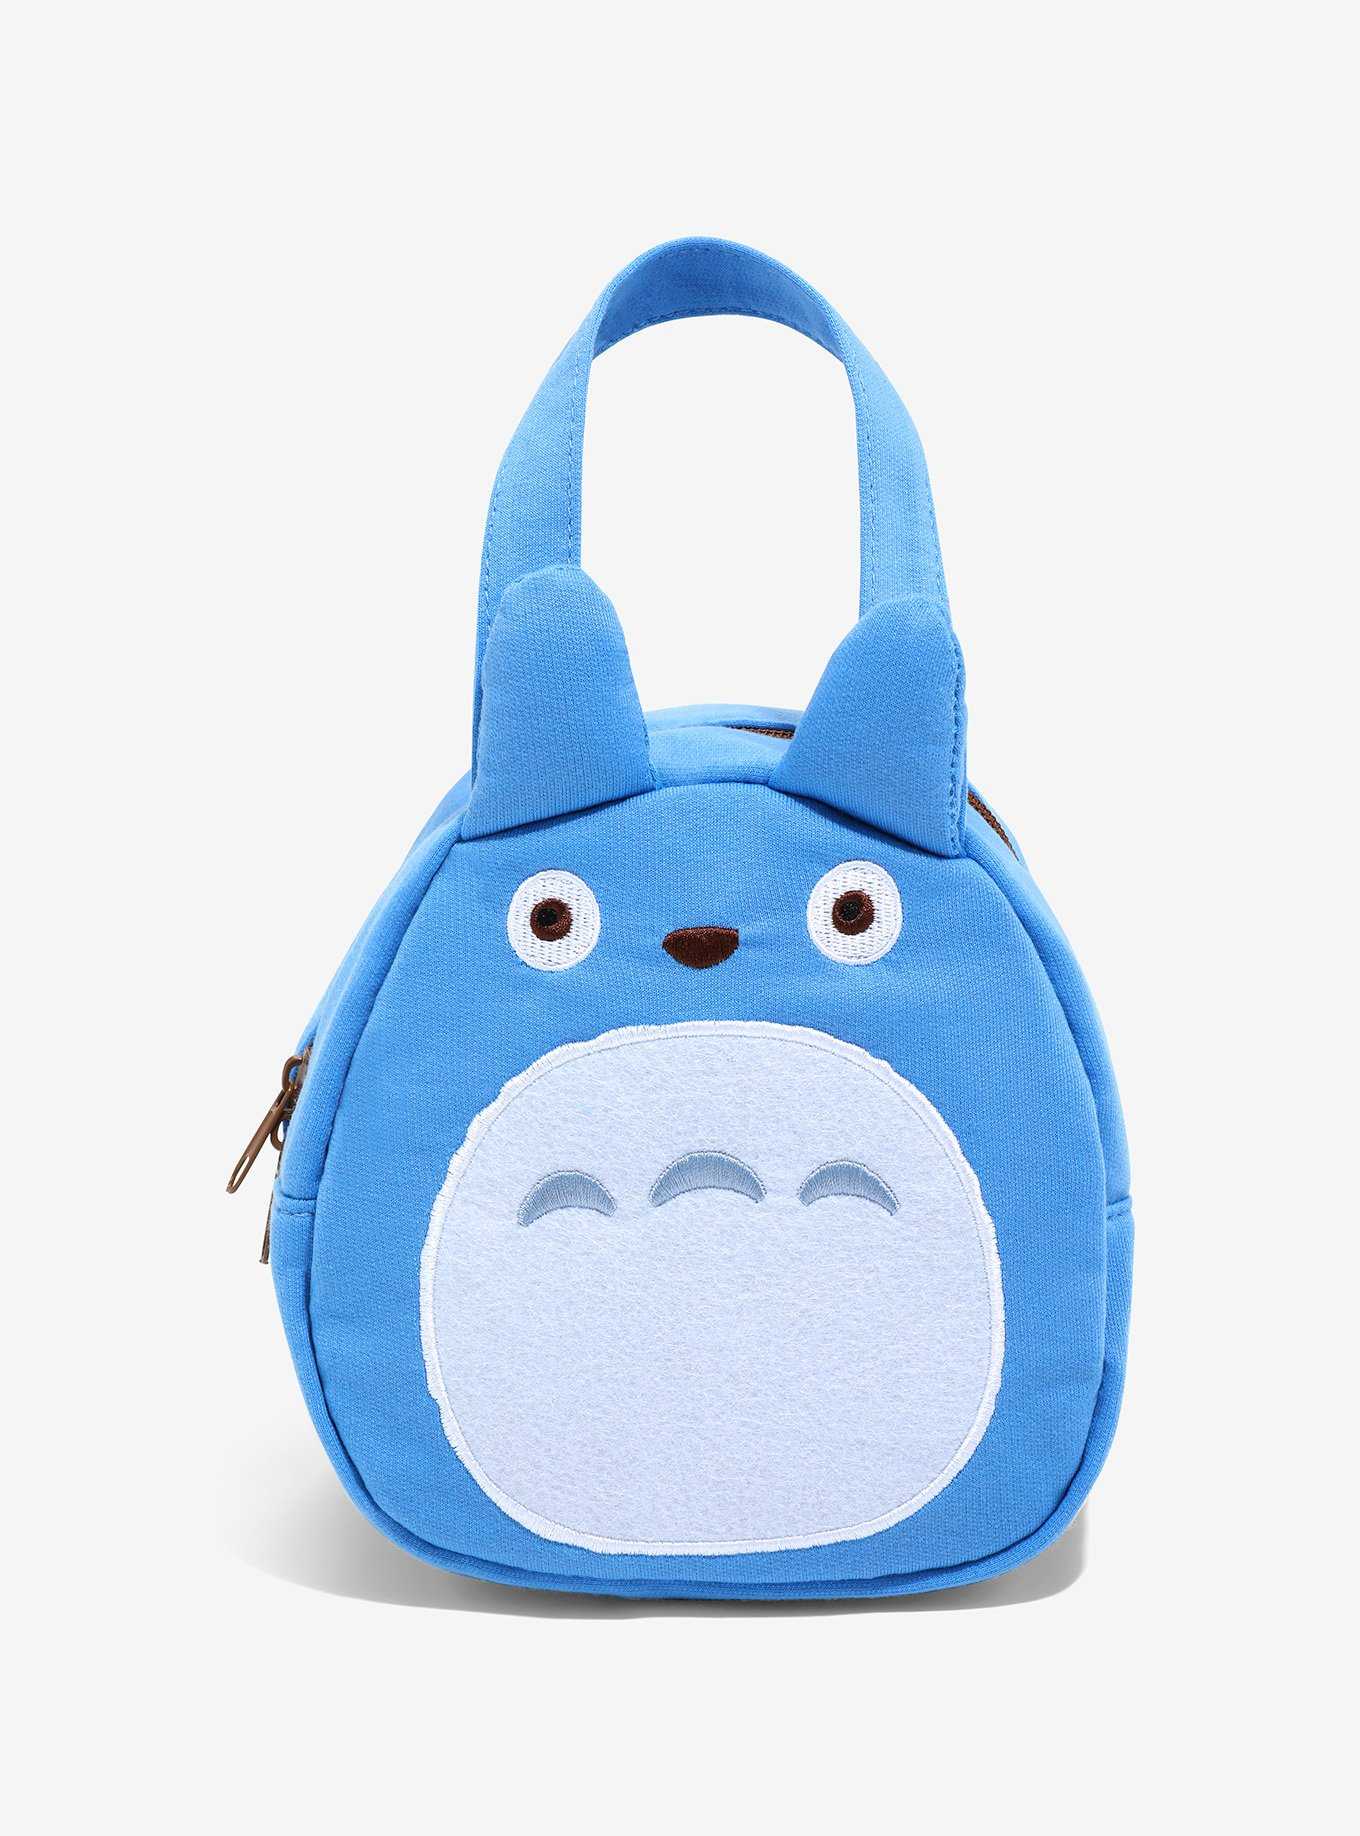 Top 3 Websites Selling Ghibli Merch Products - Rick and Morty Shop